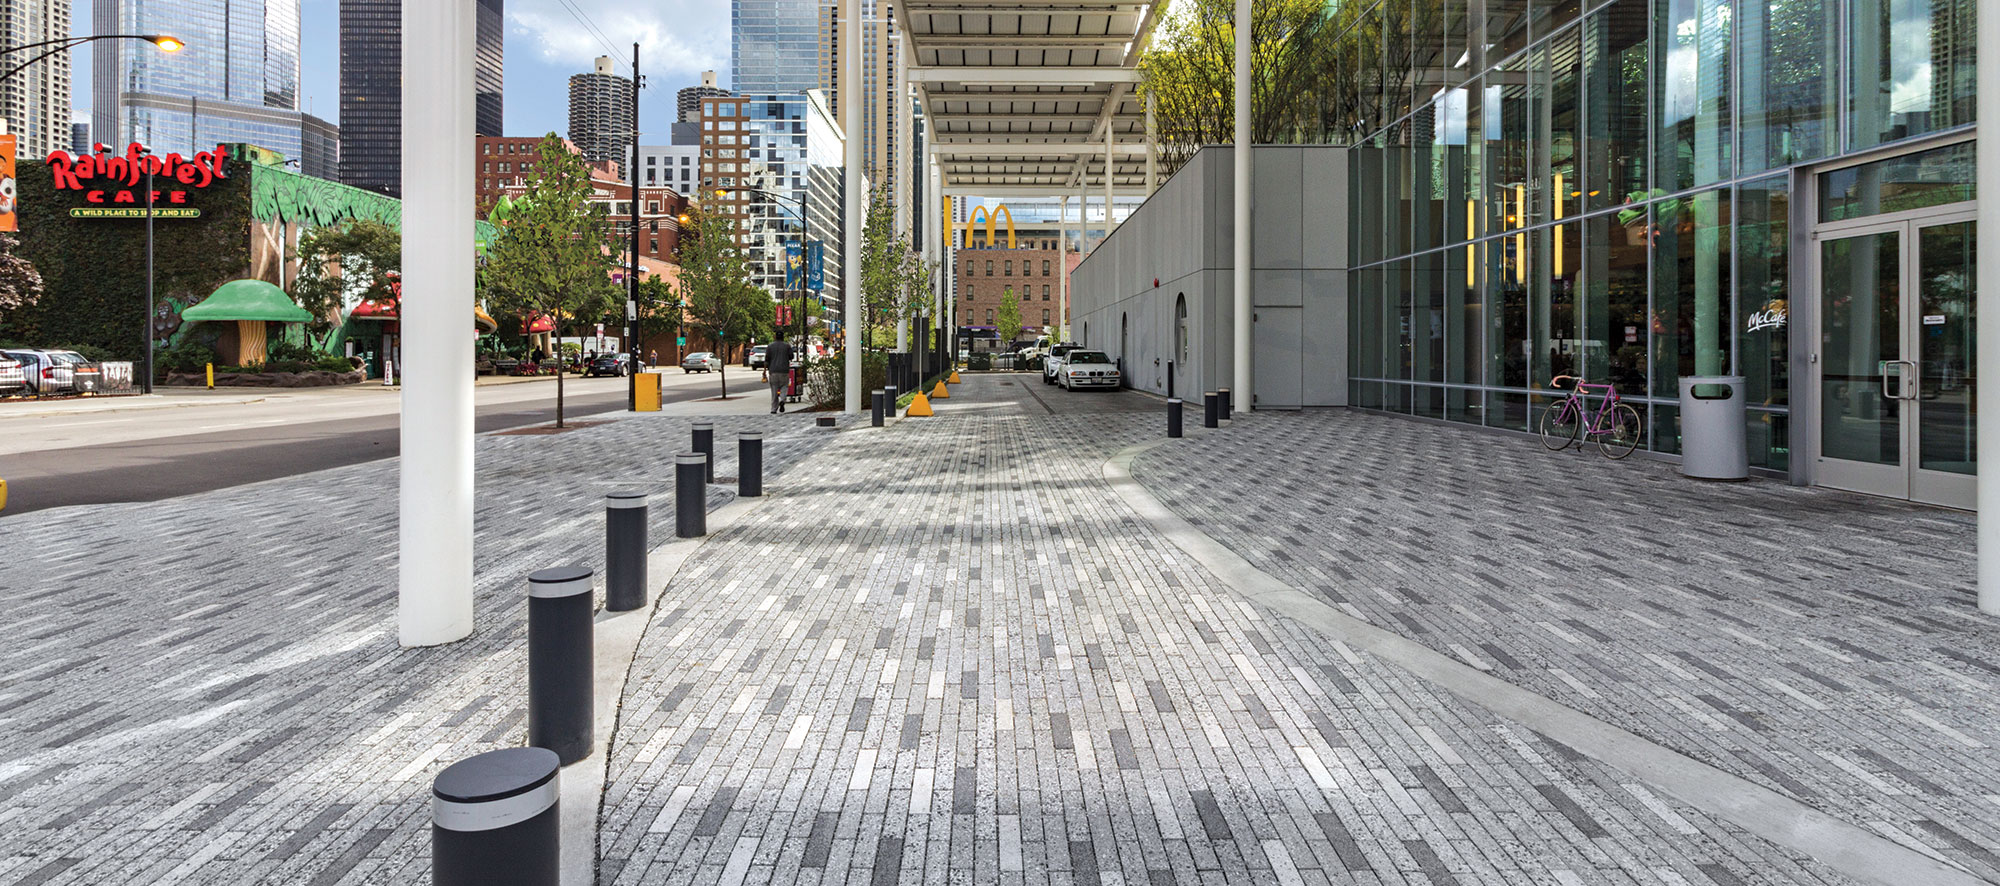 Eco-Promenade permeable pavers in different tones from white to dark grey with a speckled finish pave the sidewalk and roadway.